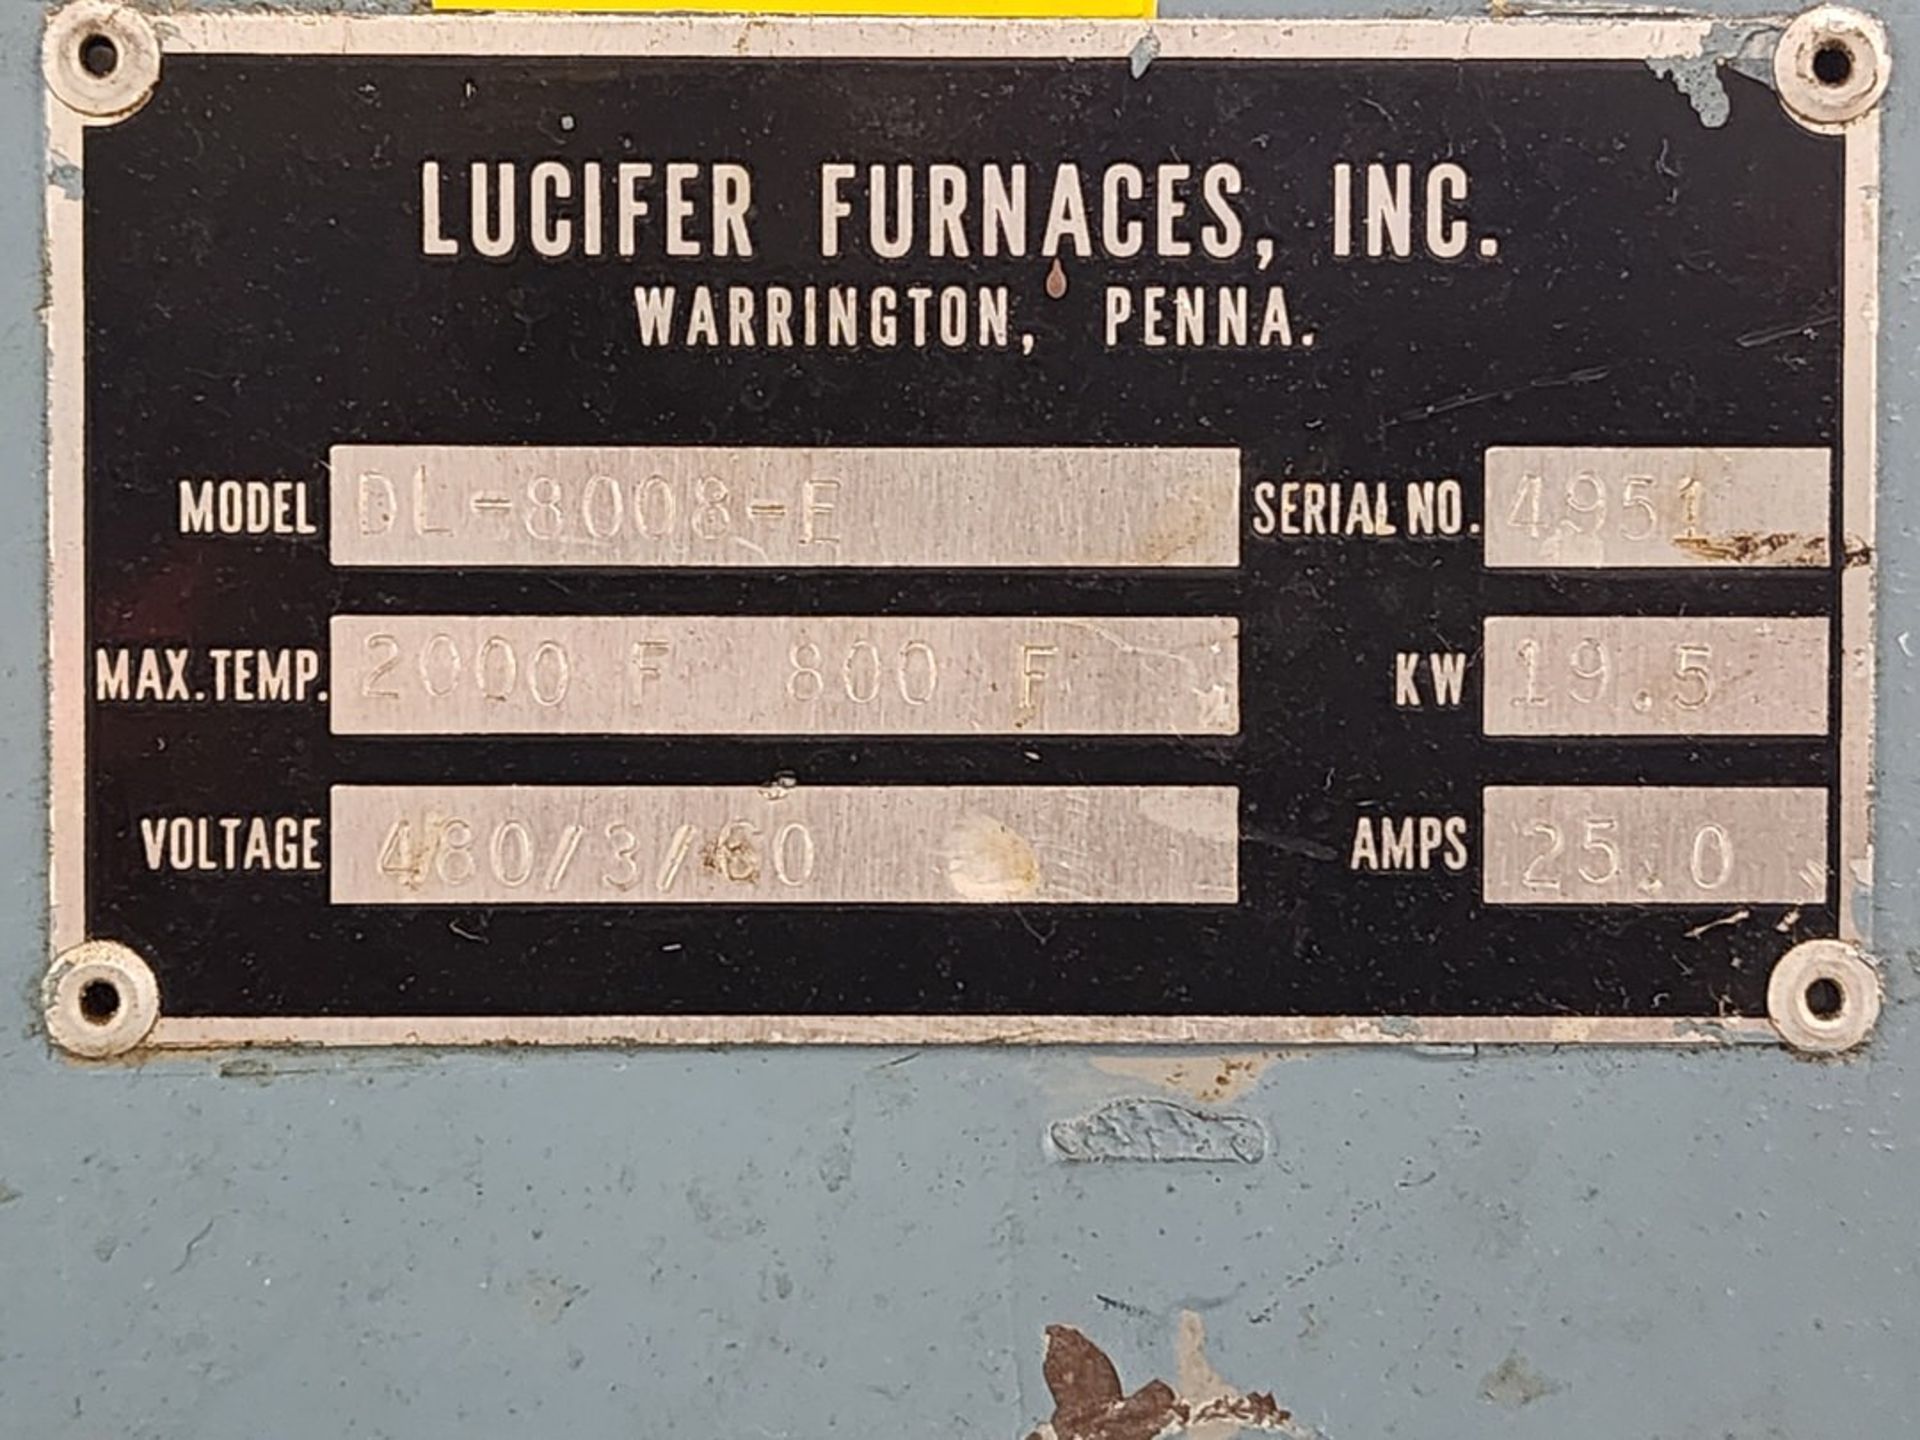 Lucifer D1-8008-F Furnace 2000F Max Temp, 19.5kw, 25A 480/3/60; W/ Control Panel - Image 8 of 12